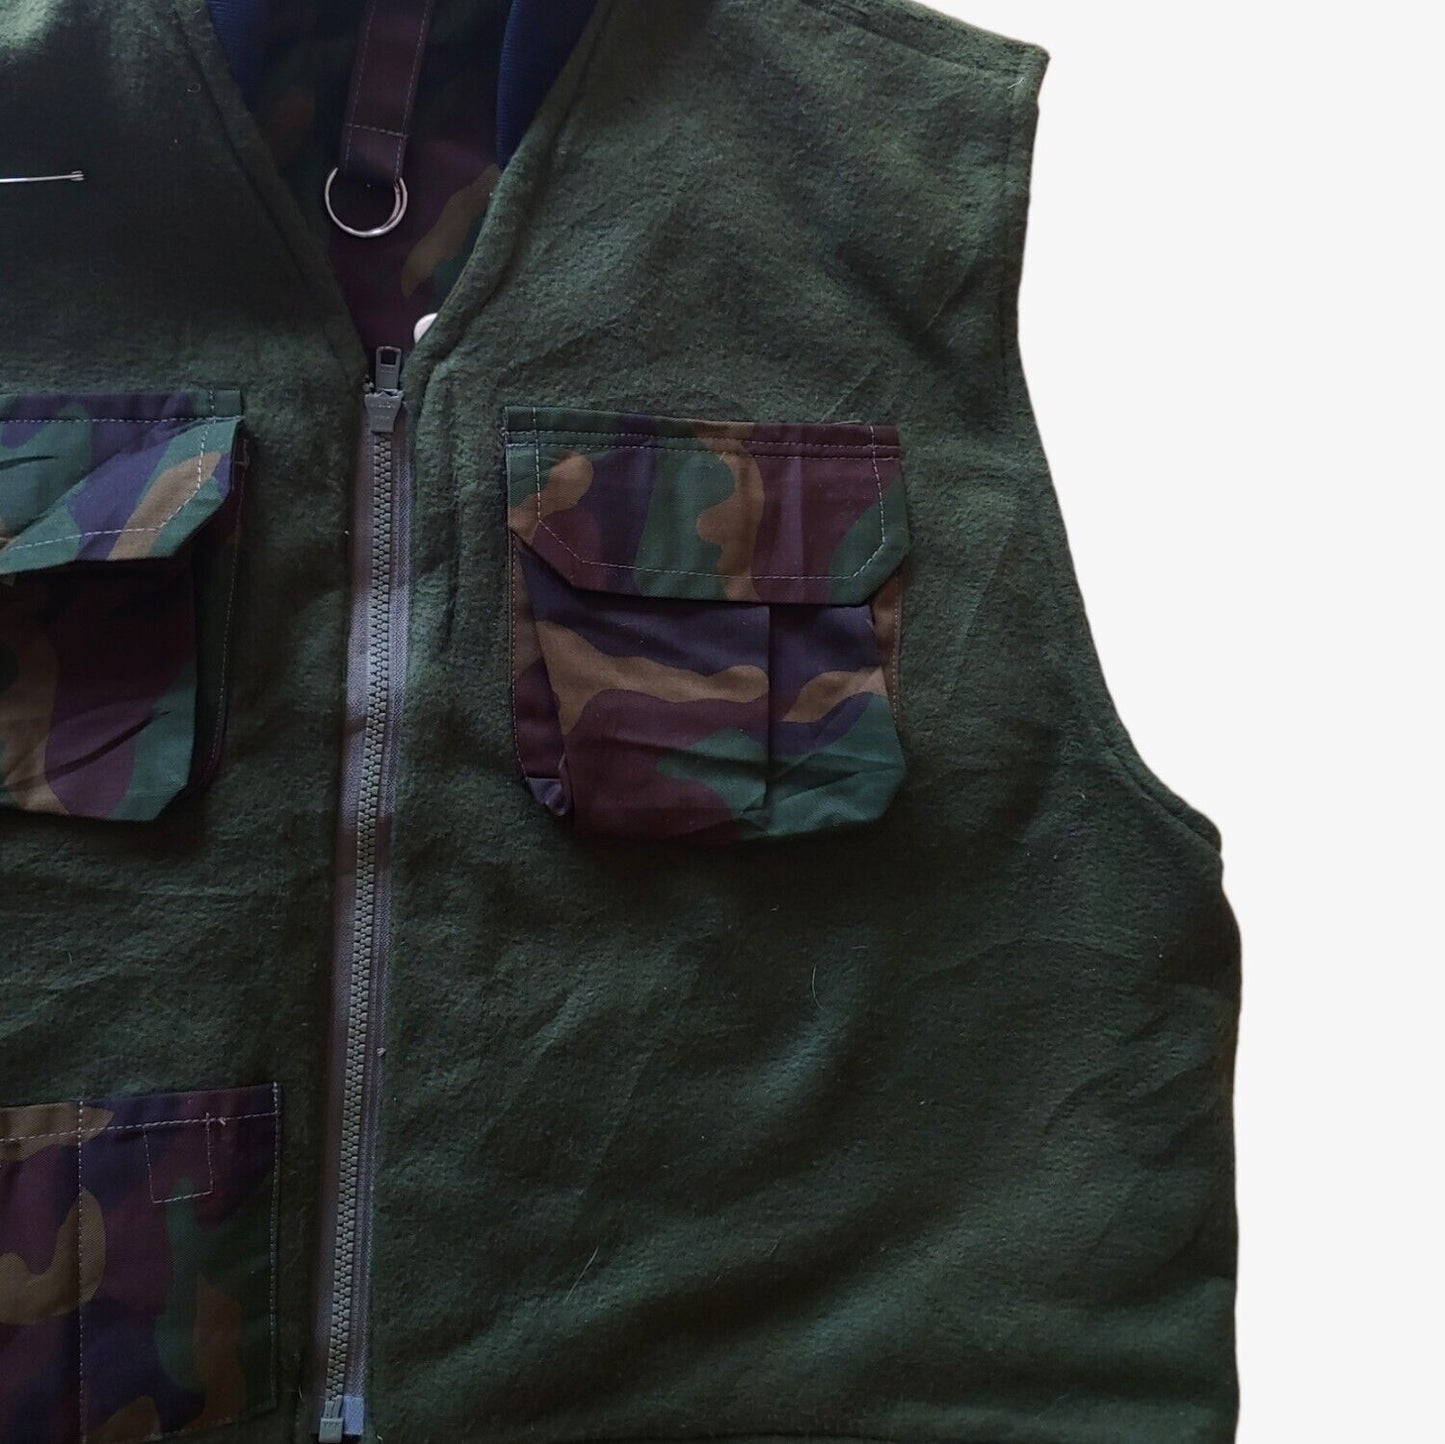 Vintage 1990s New Contrast Camouflage Hunting Utility Army Farmer Fishing Gilet Inside Pocket - Casspios Dream